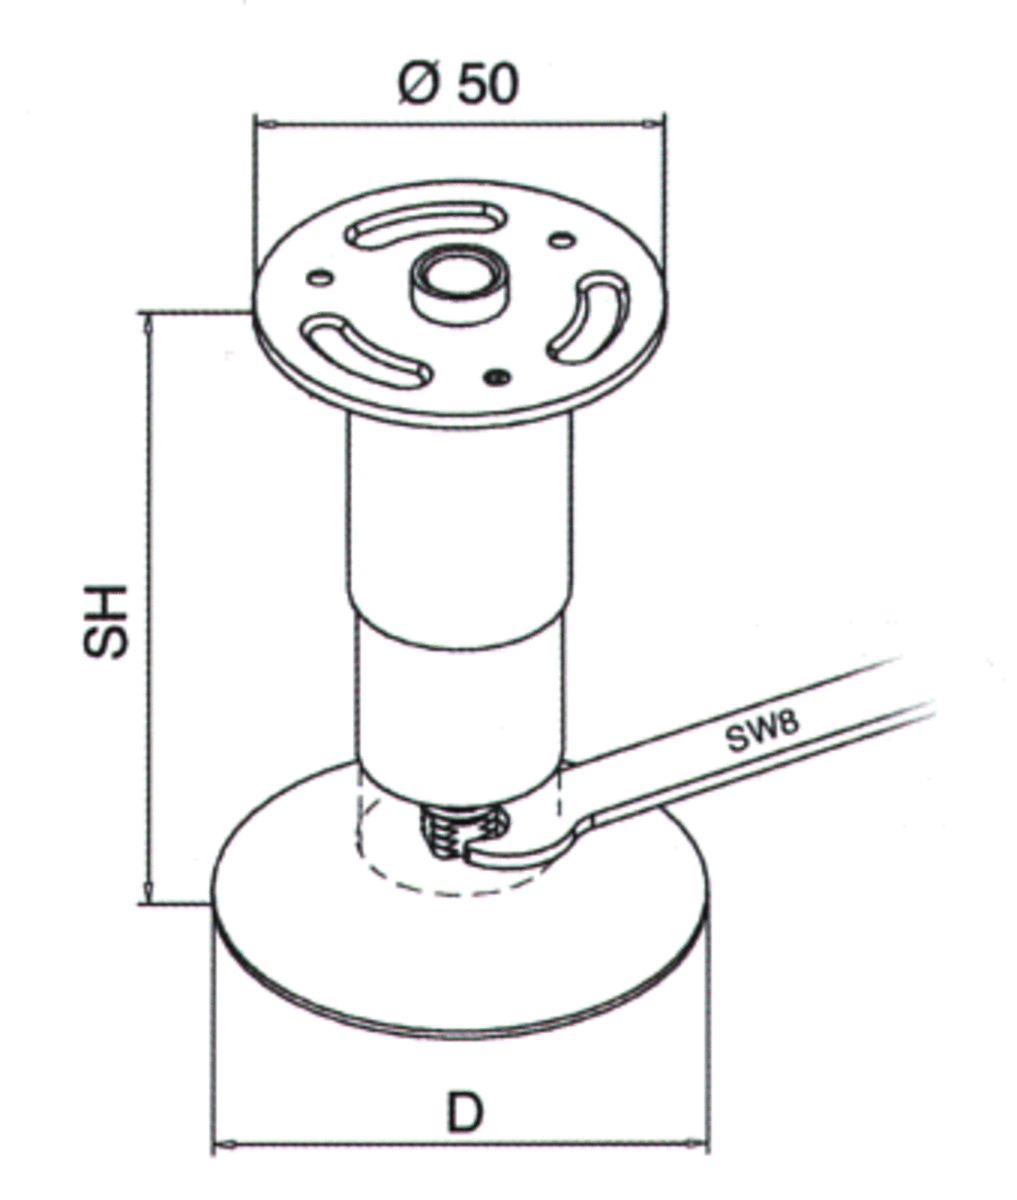 Stainless Steel Mounting Foot